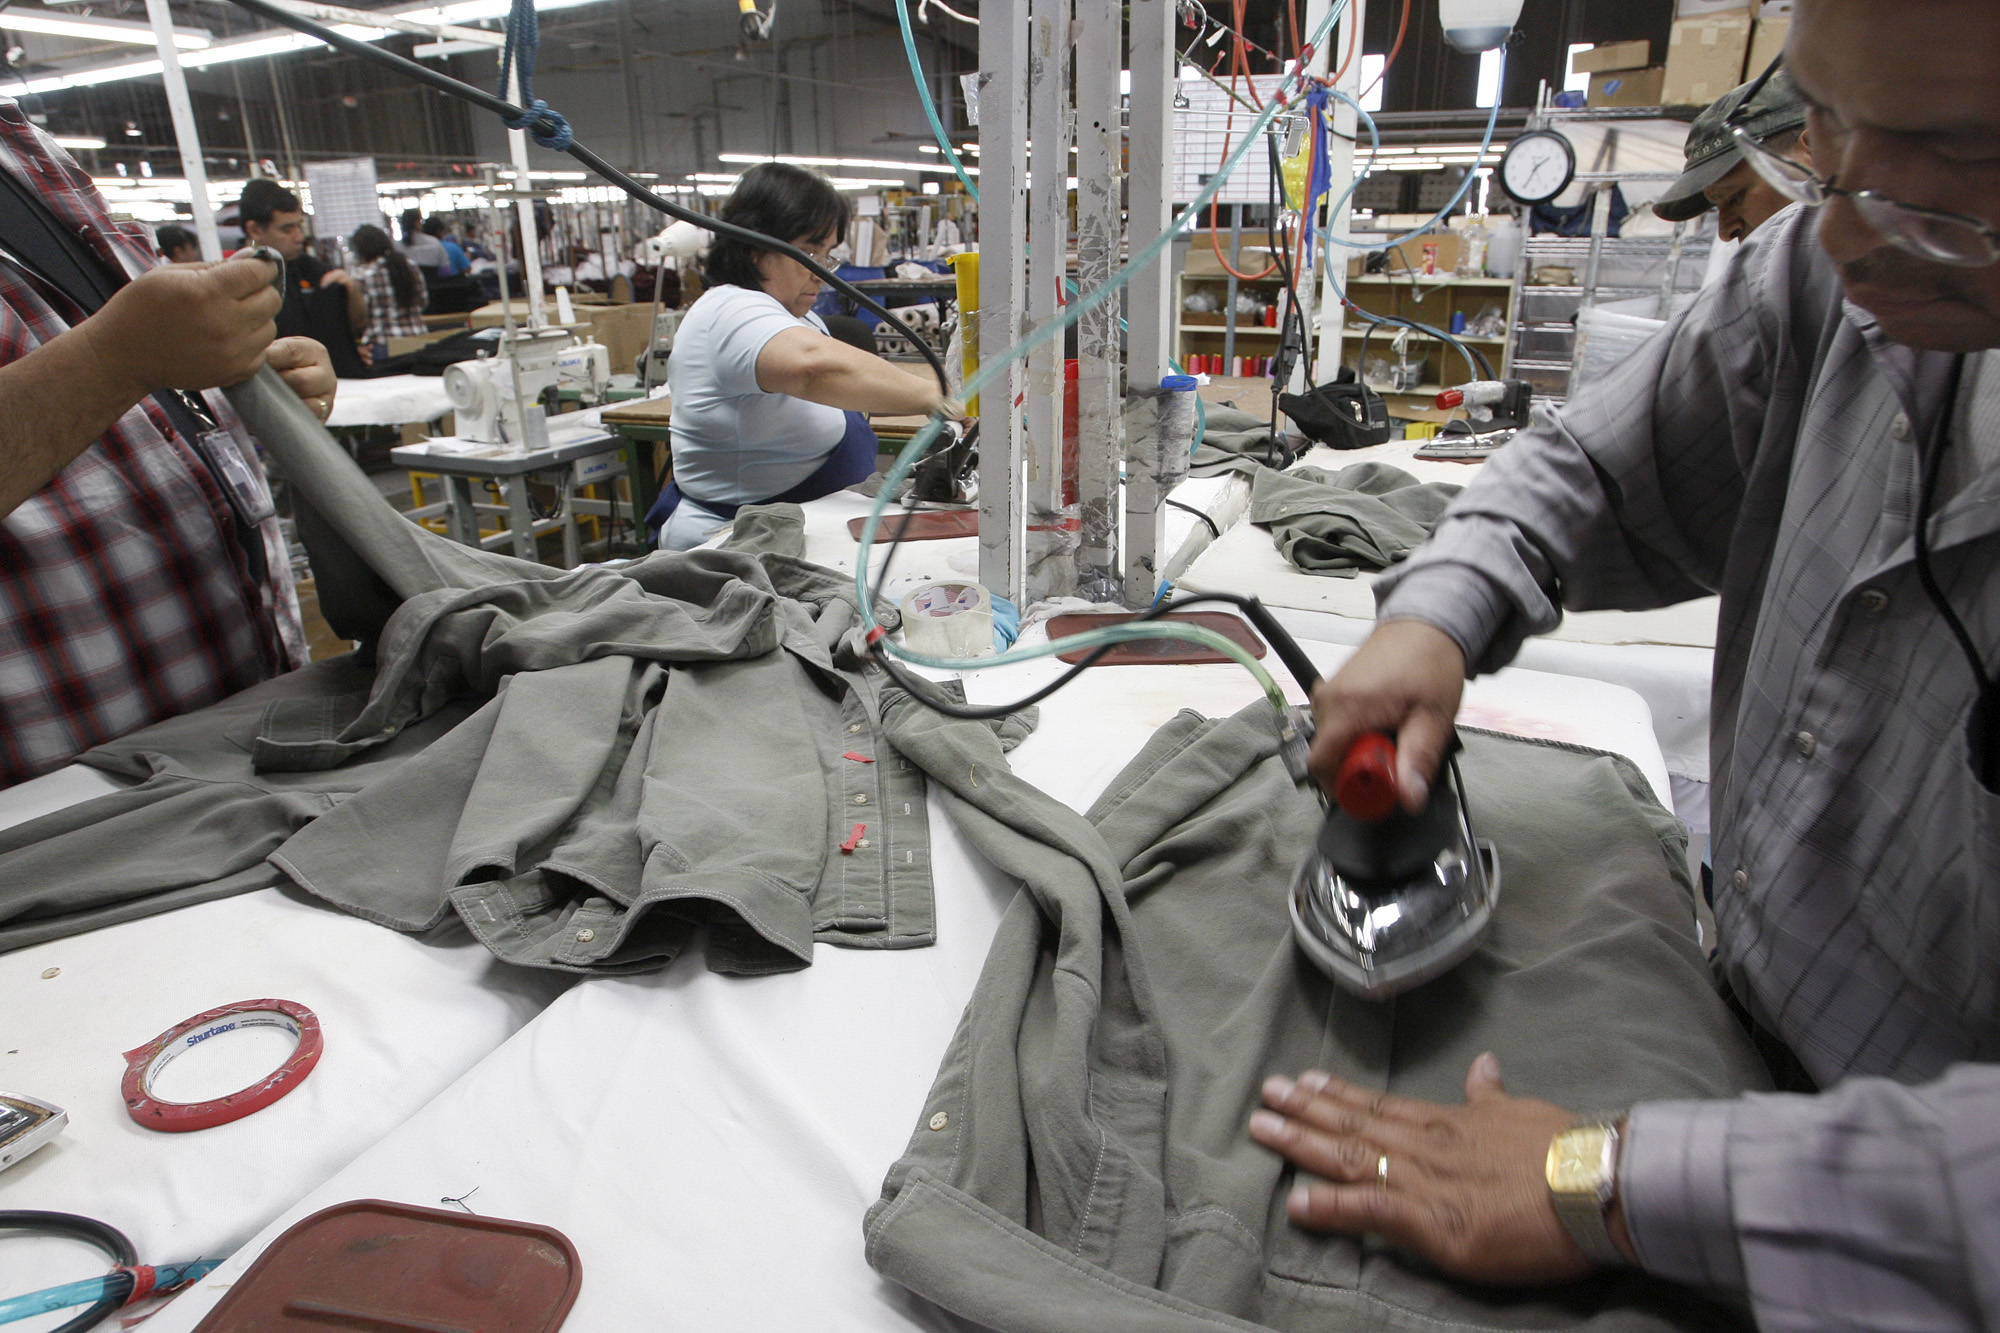 Dov Charney's Los Angeles Apparel Offers Up Factory Workforce for Mask  Production to Combat Coronavirus - Fashionista